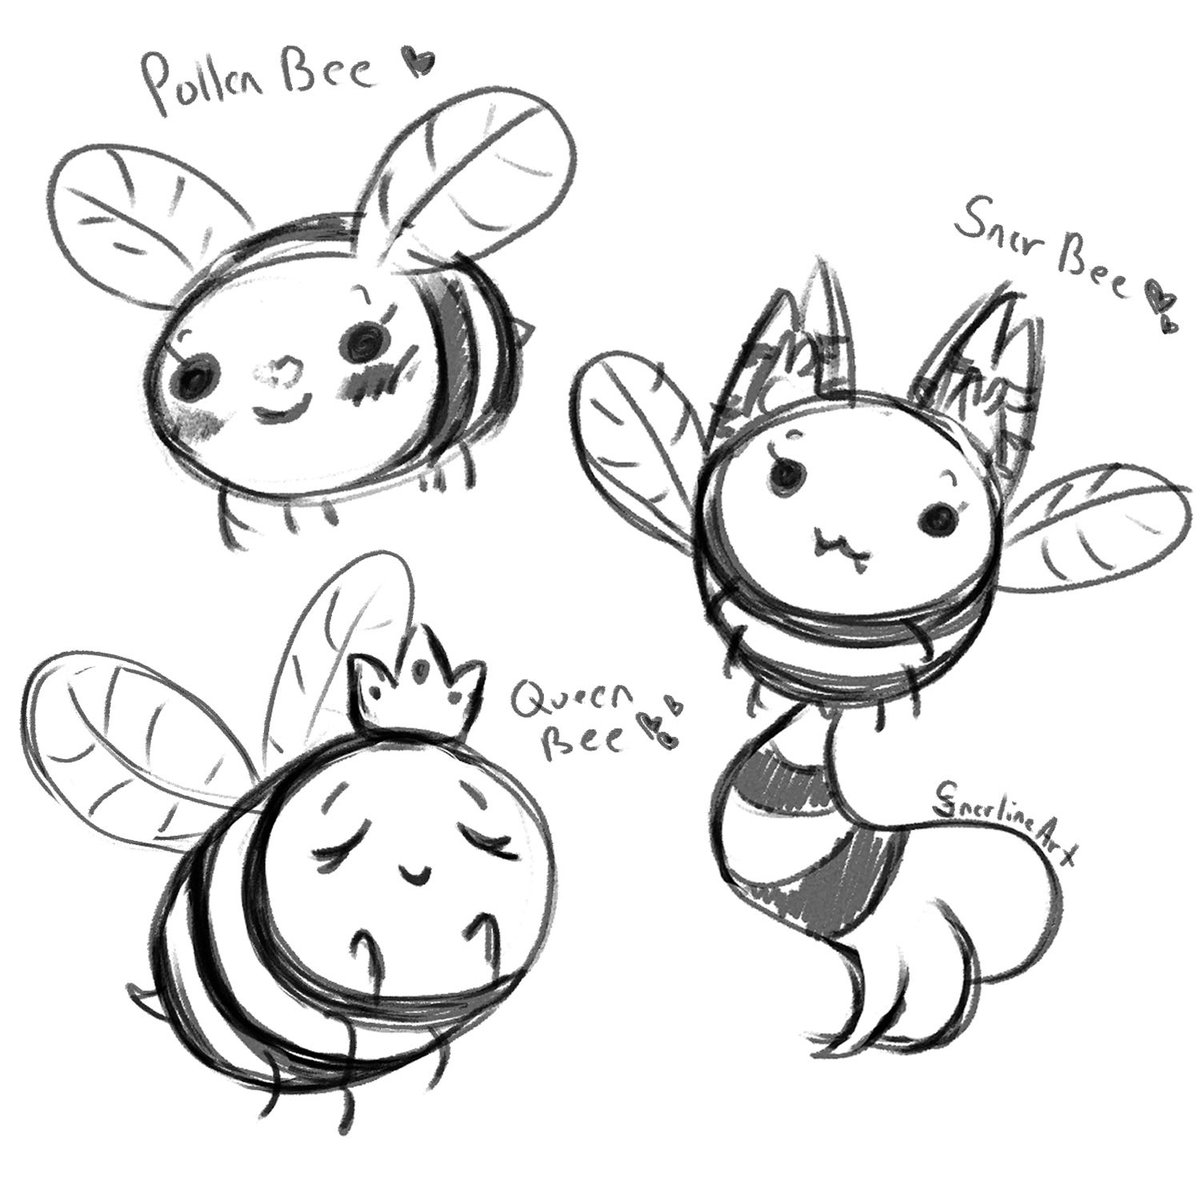 I still love these bees I drew awhile back! 💞🐝